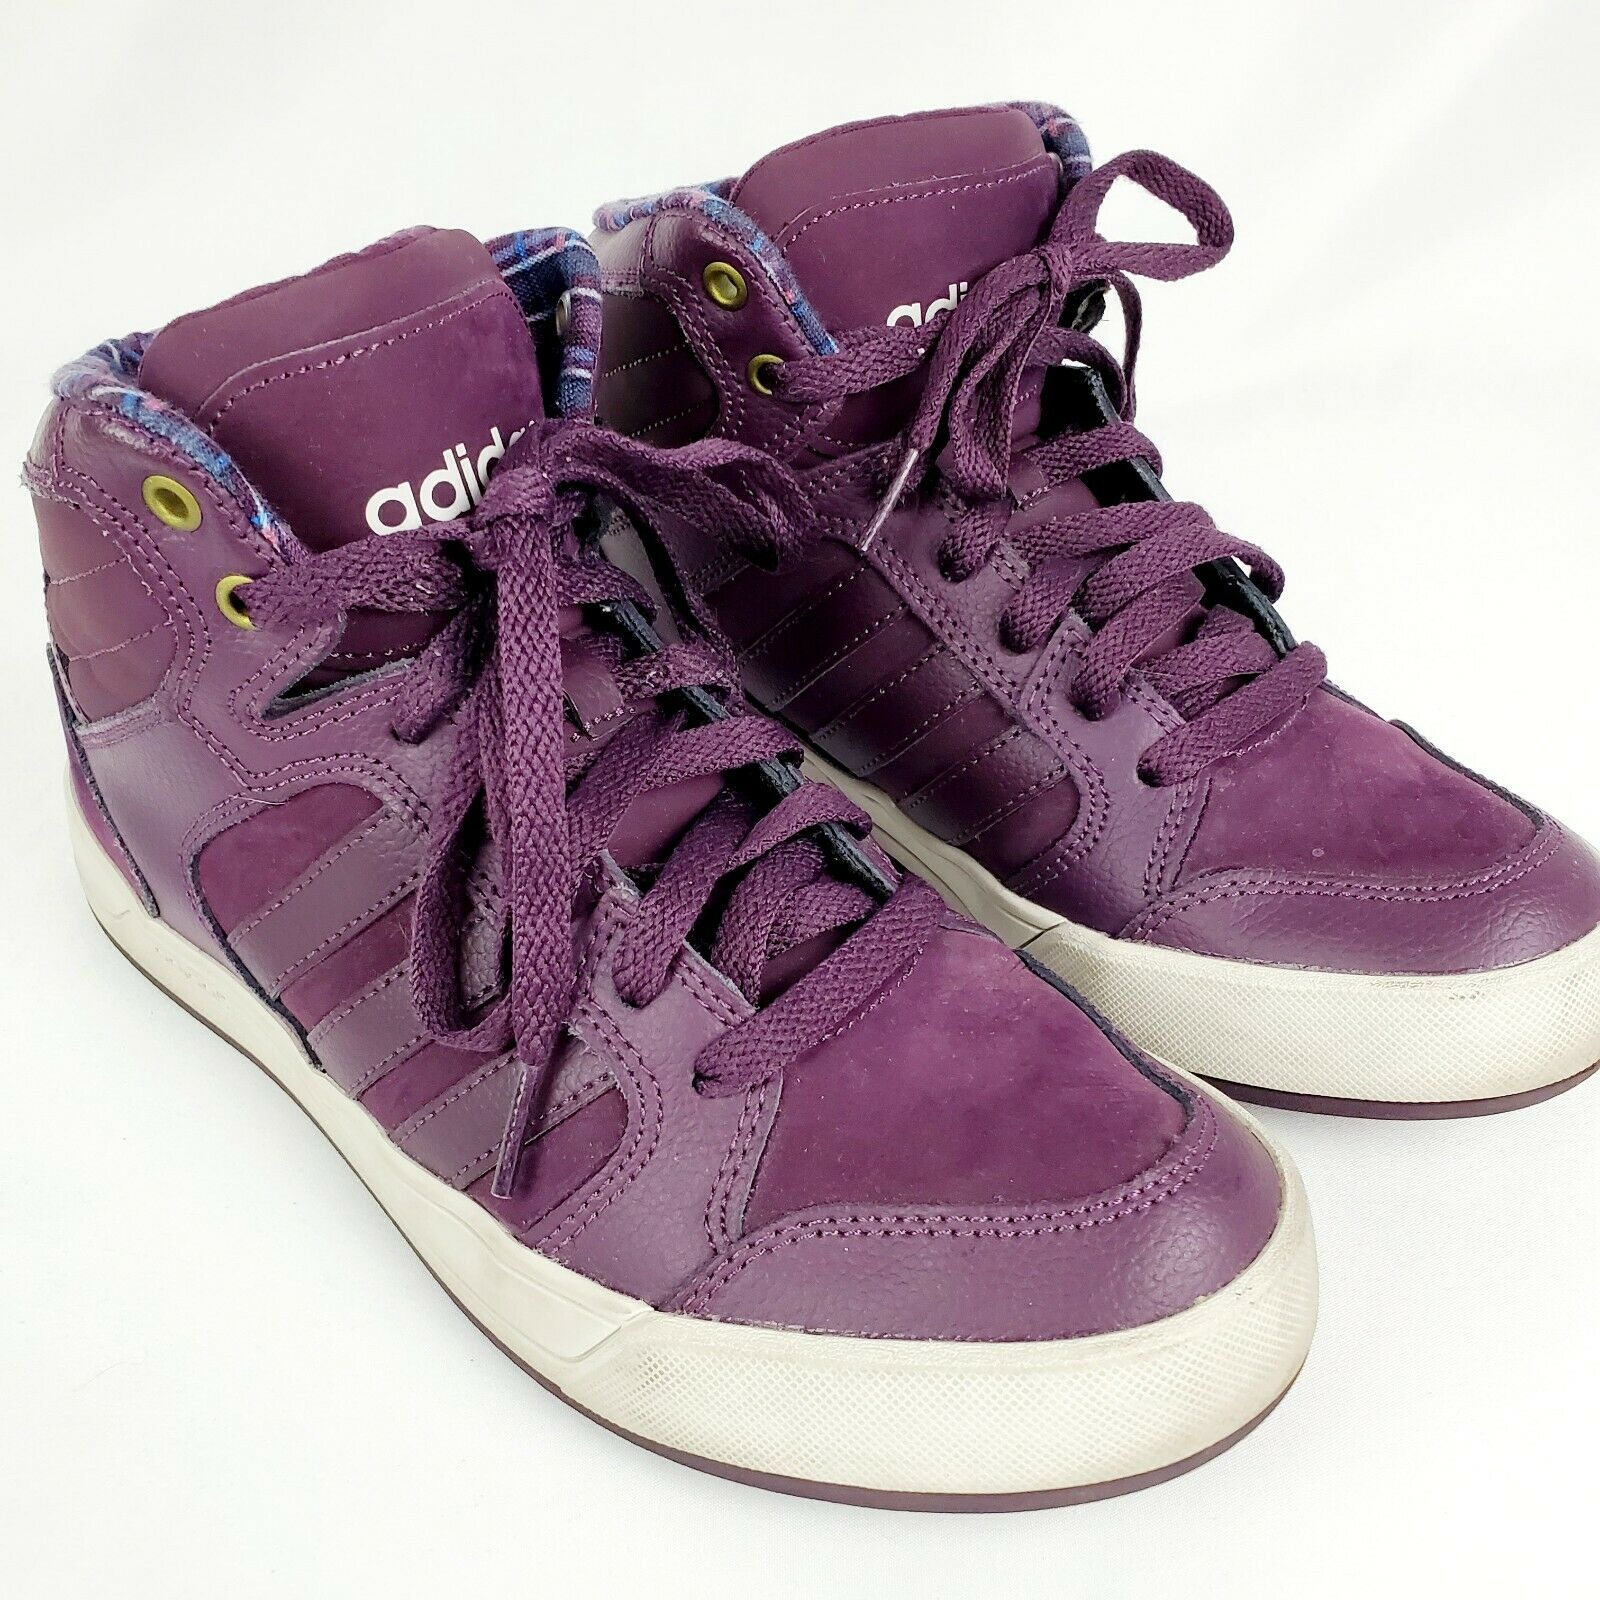 Adidas Neo Purple High Top Sneakers Shoes Women’s Size 8 Flannel Lining